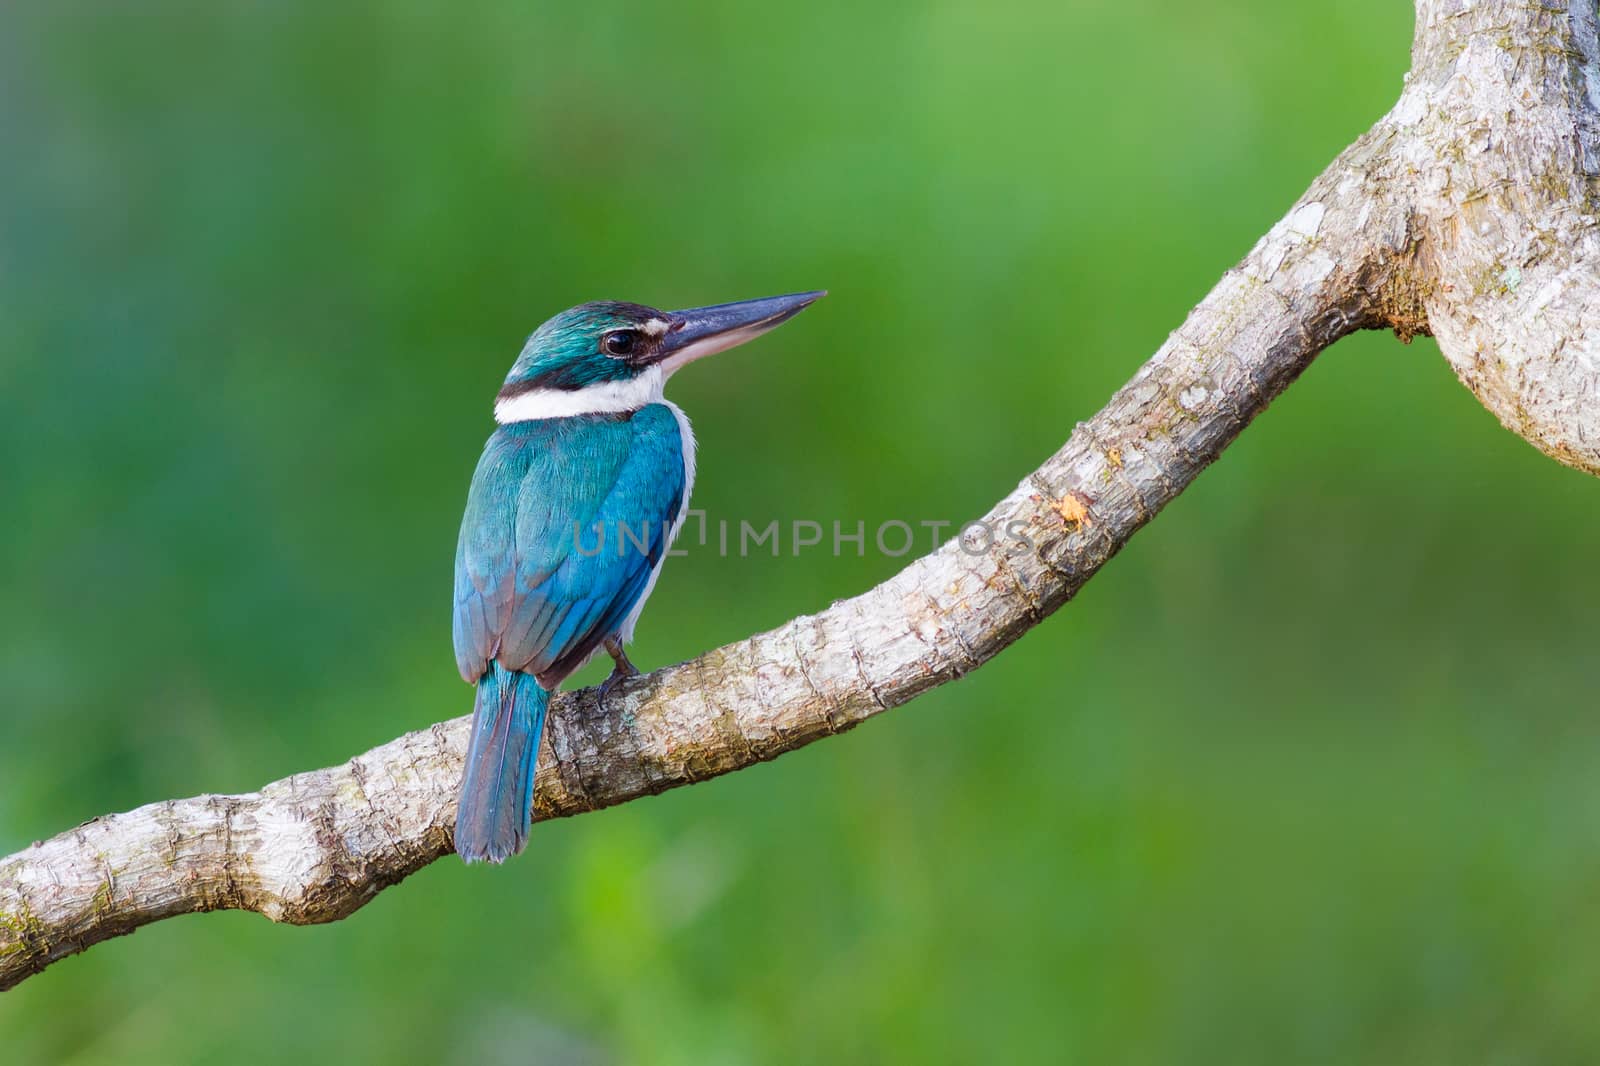 Collared Kingfisher on branch.